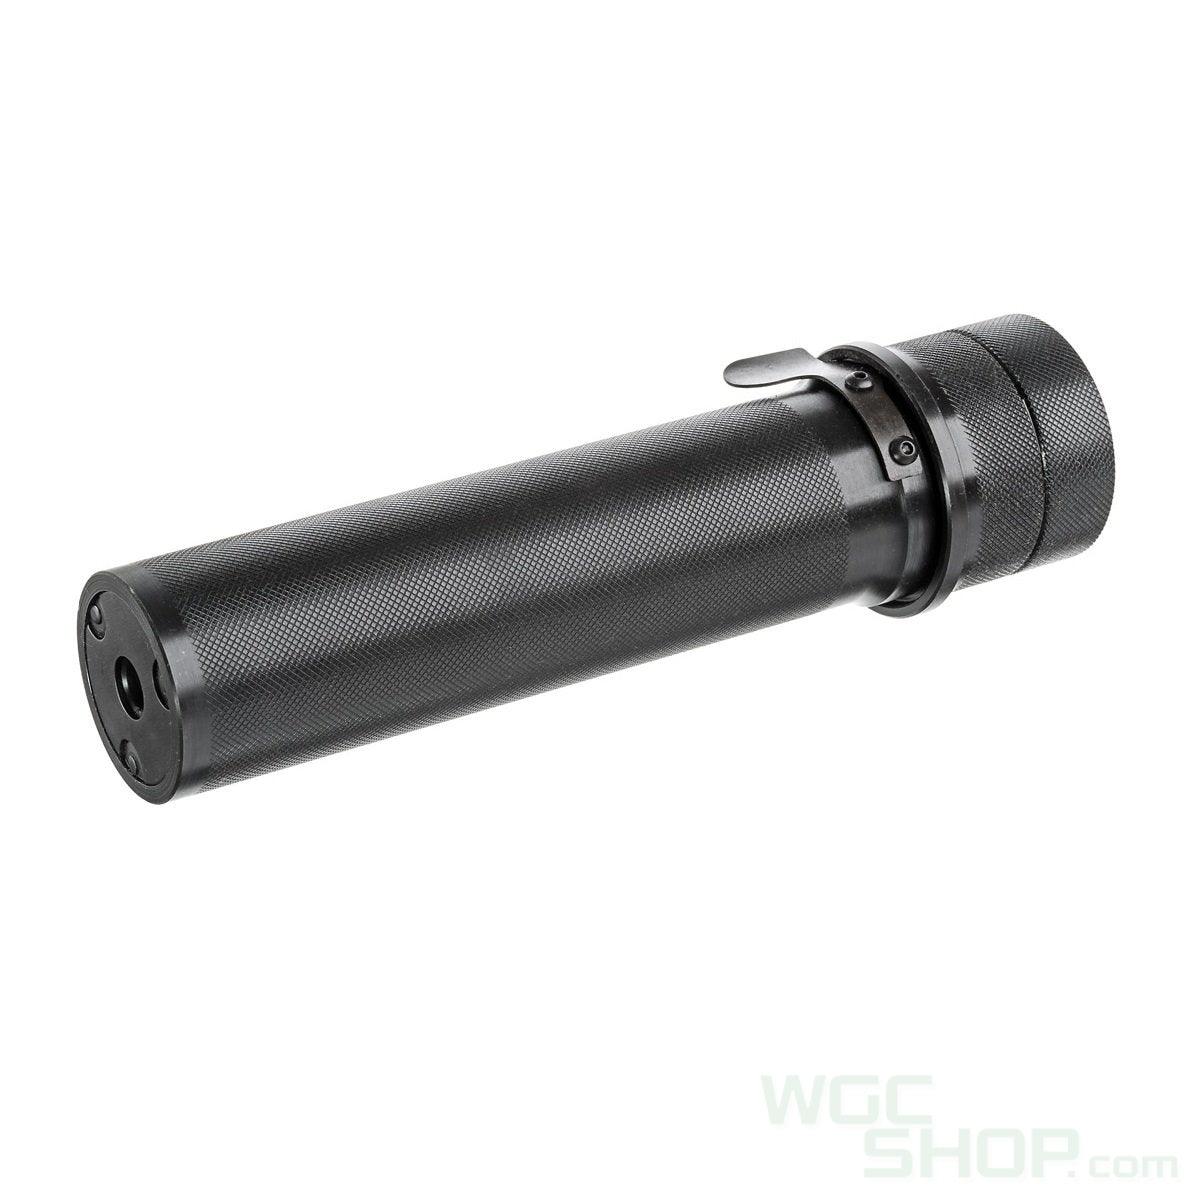 No Restock Date - LCT PBS-1 Mock Barrel Extension with Tracer Unit ( PK258T ) - WGC Shop